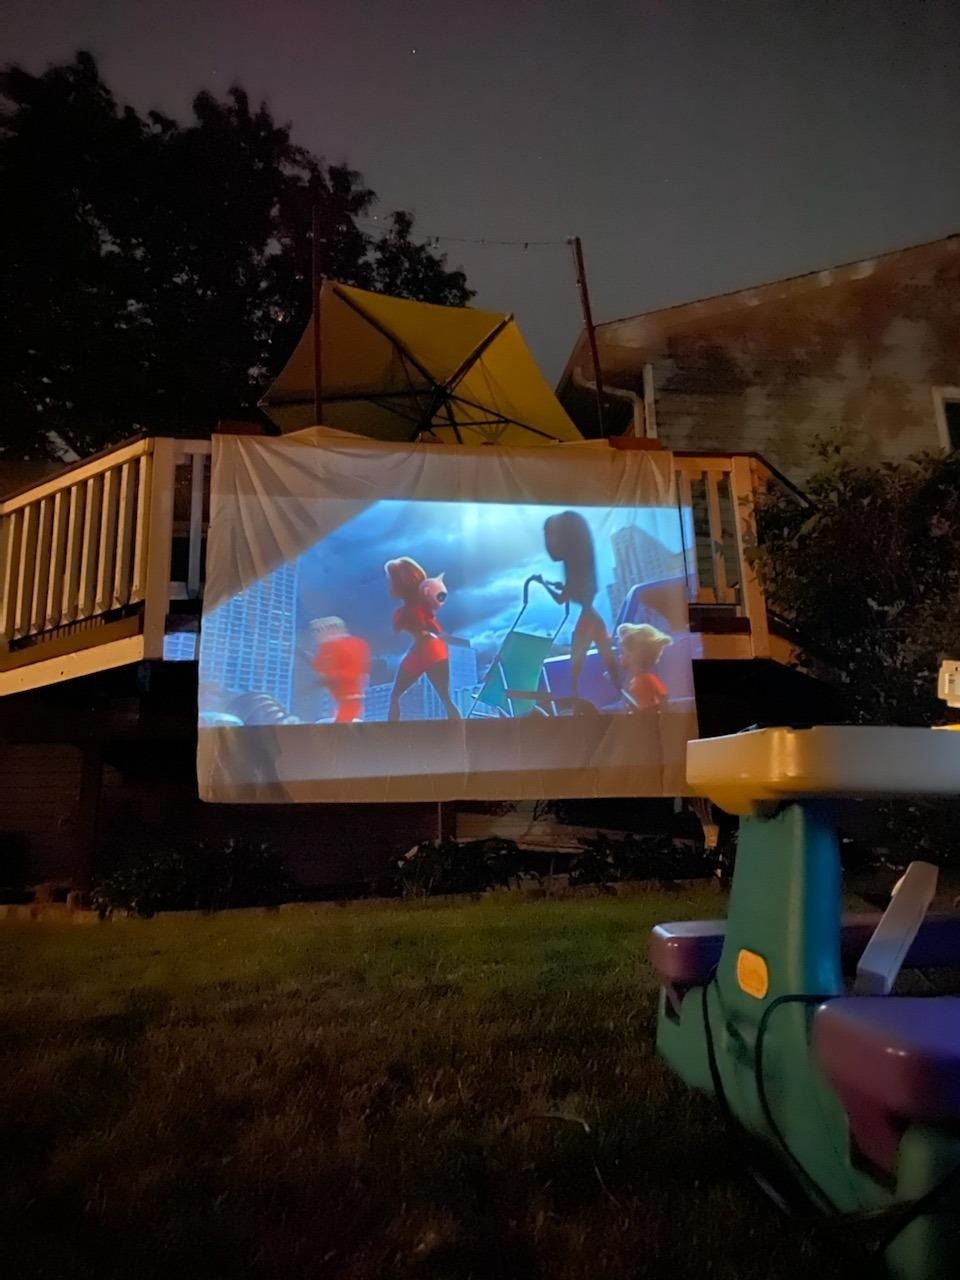 the projector attached to an outdoor pool railing at night